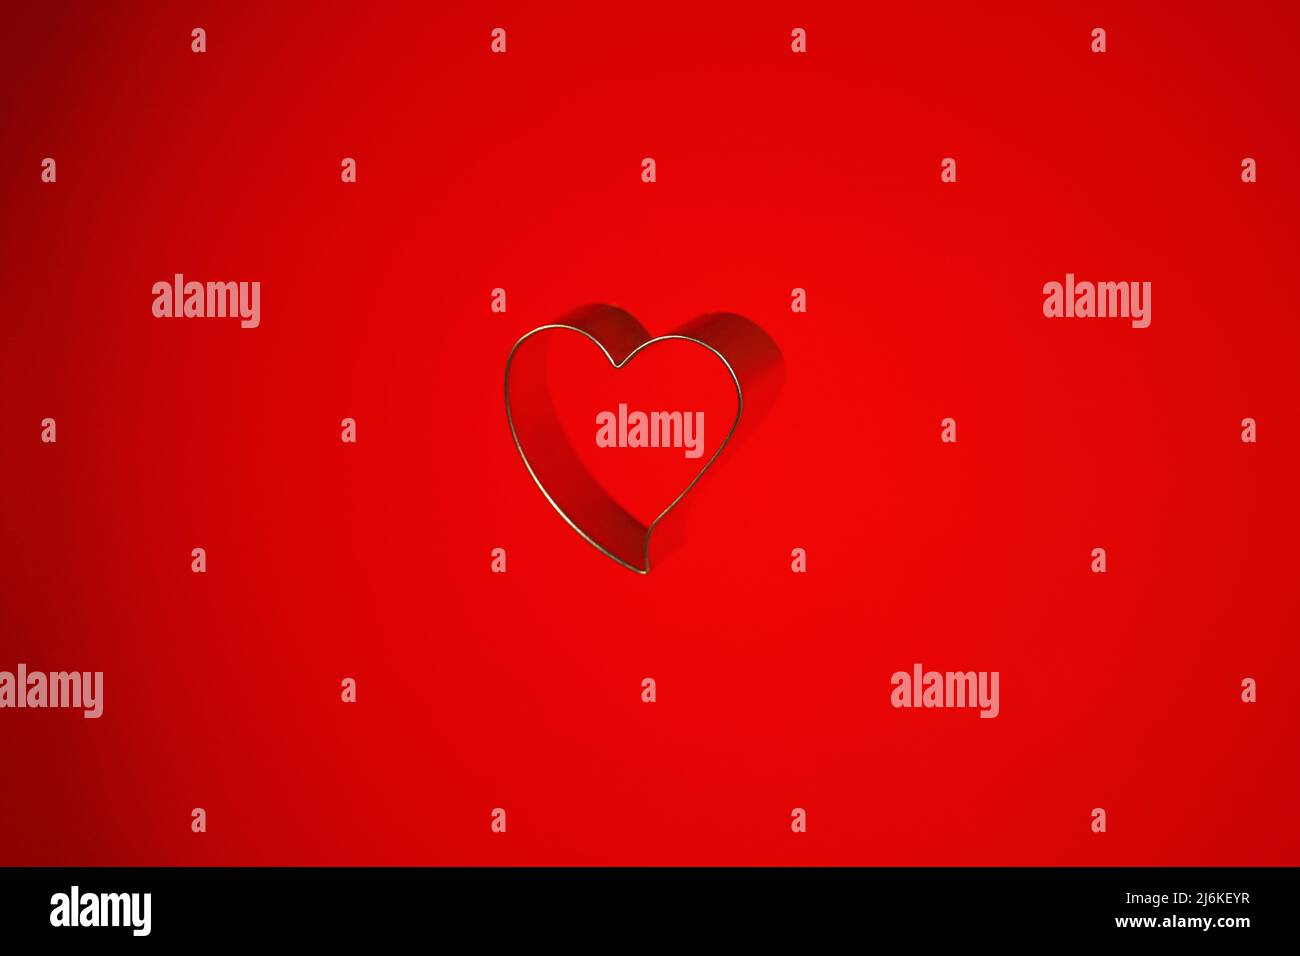 Still life of a heart shaped isolated object on a red background Stock Photo